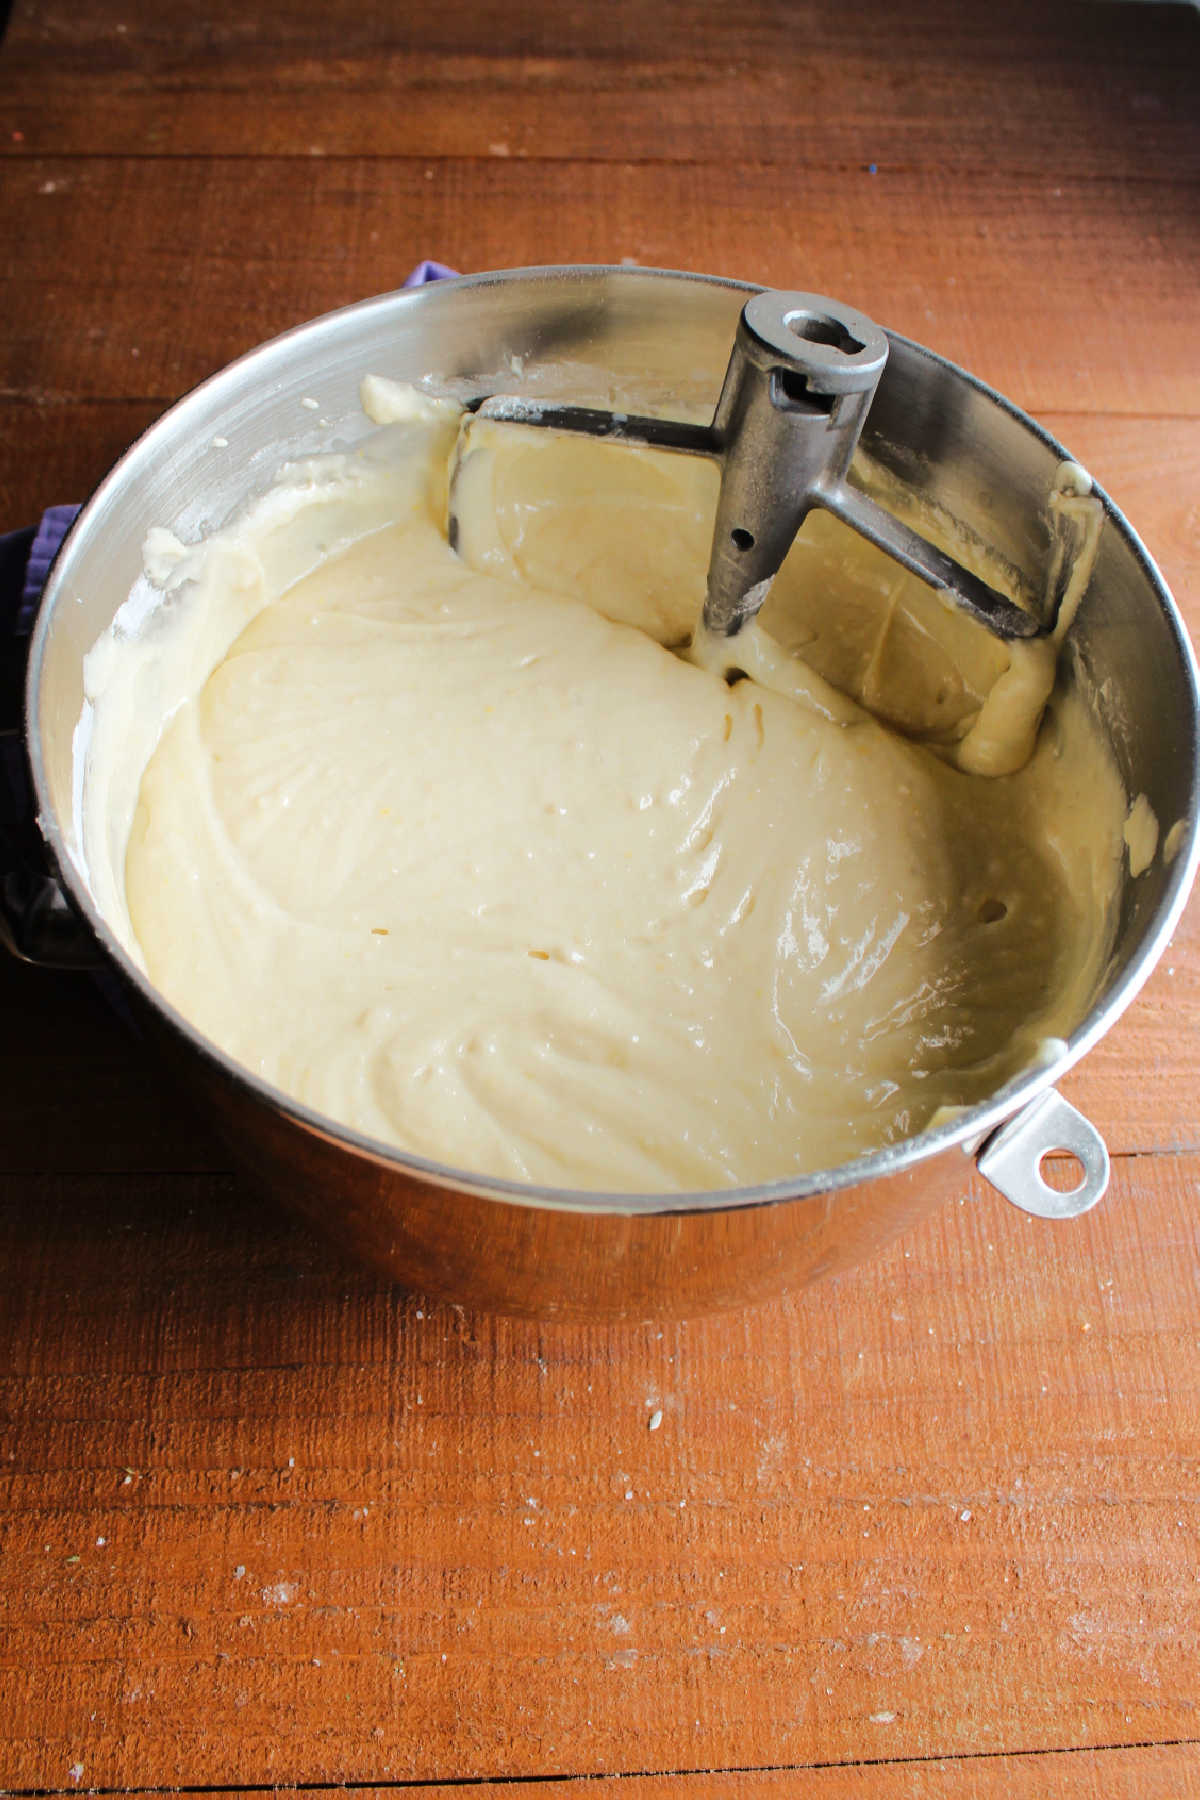 Mixer bowl of completed vanilla cake batter showing thick texture.